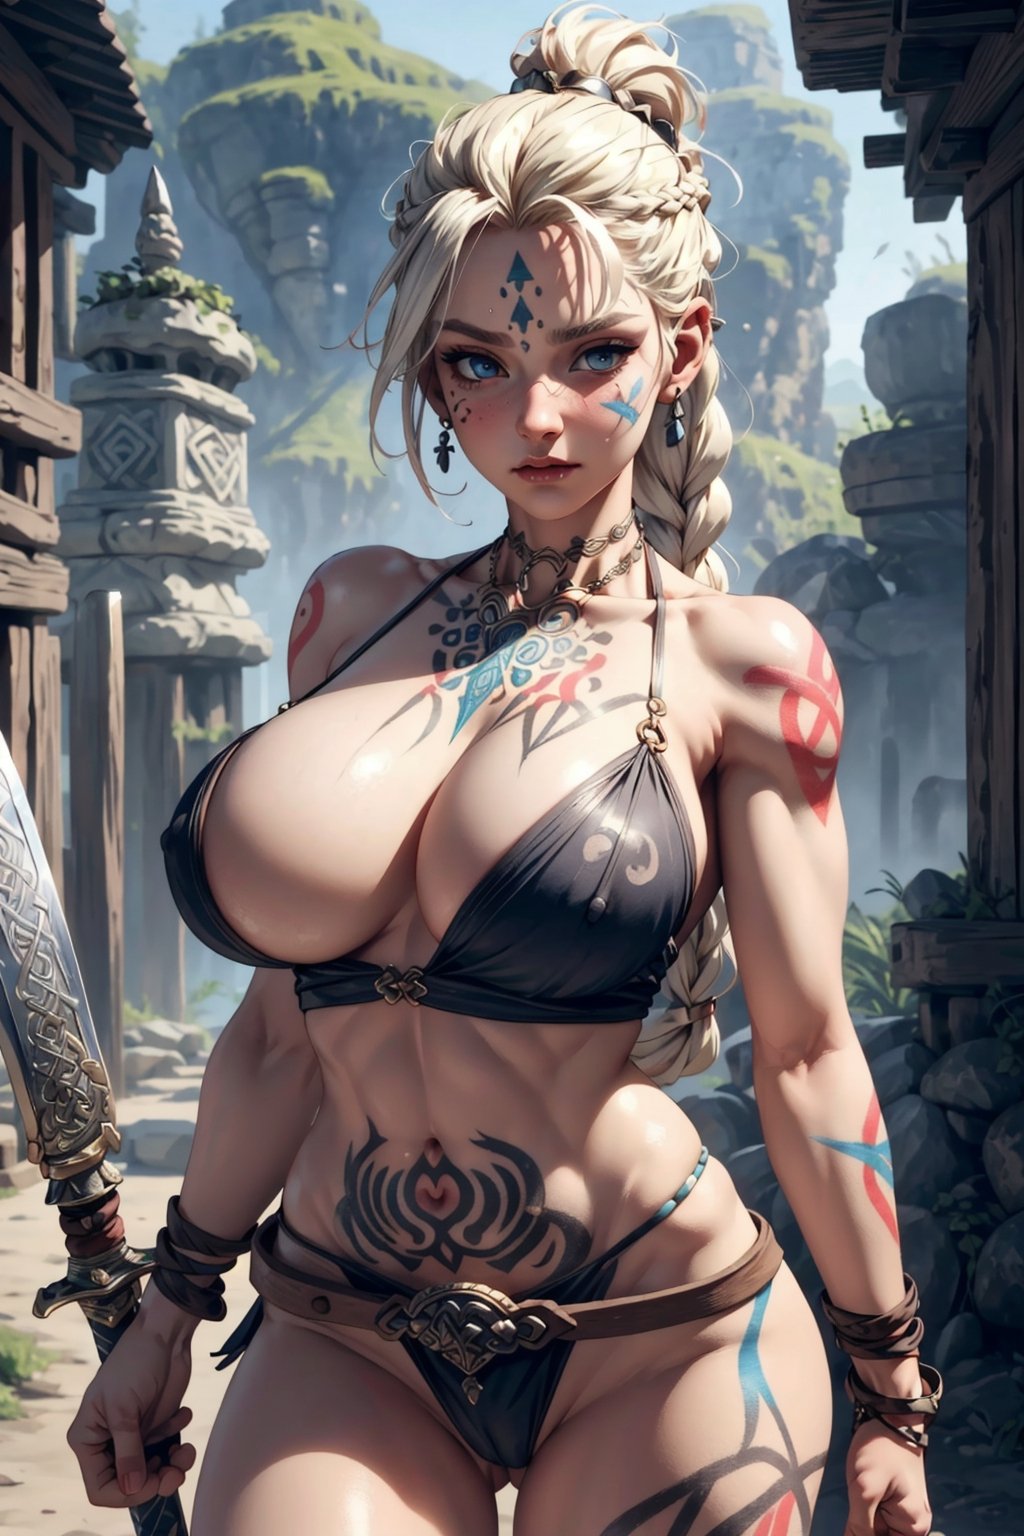 Ultra realistic 8k cg,picture-perfect face,blush,(barbarian queen),flawless,clean,masterpiece,professional artwork,(perfect female body,huge breast)thicc hips,abs,muscular legs,goddess,platinum blonde,braids,celtic,fantasy,dreamlike,unreal,sexy,charming,alluring,enchanting,makeup,earring,tattoos,furs,belts,straps,fur tanktop,loincloth,bone necklace,(colorfull),warpaint,facepaint,celtic highlands,sword on back